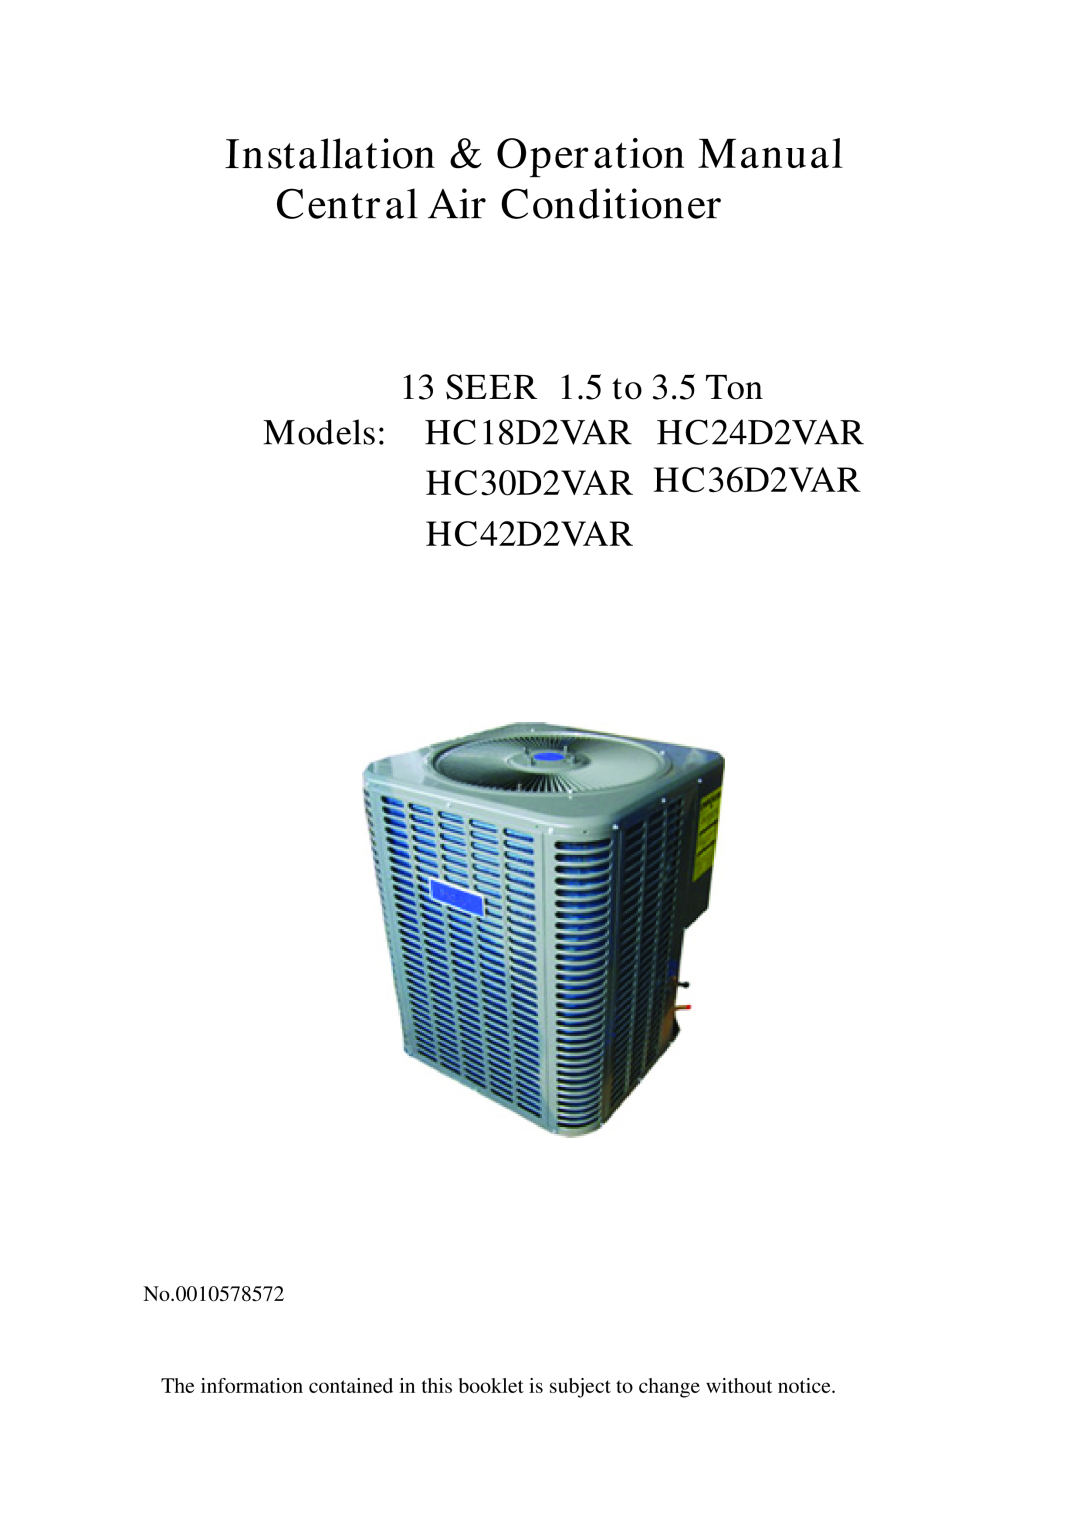 Haier operation manual SEER 1.5 to 3.5 Ton Models HC18D2VAR HC24D2VAR HC30D2VAR HC36D2VAR, HC42D2VAR 